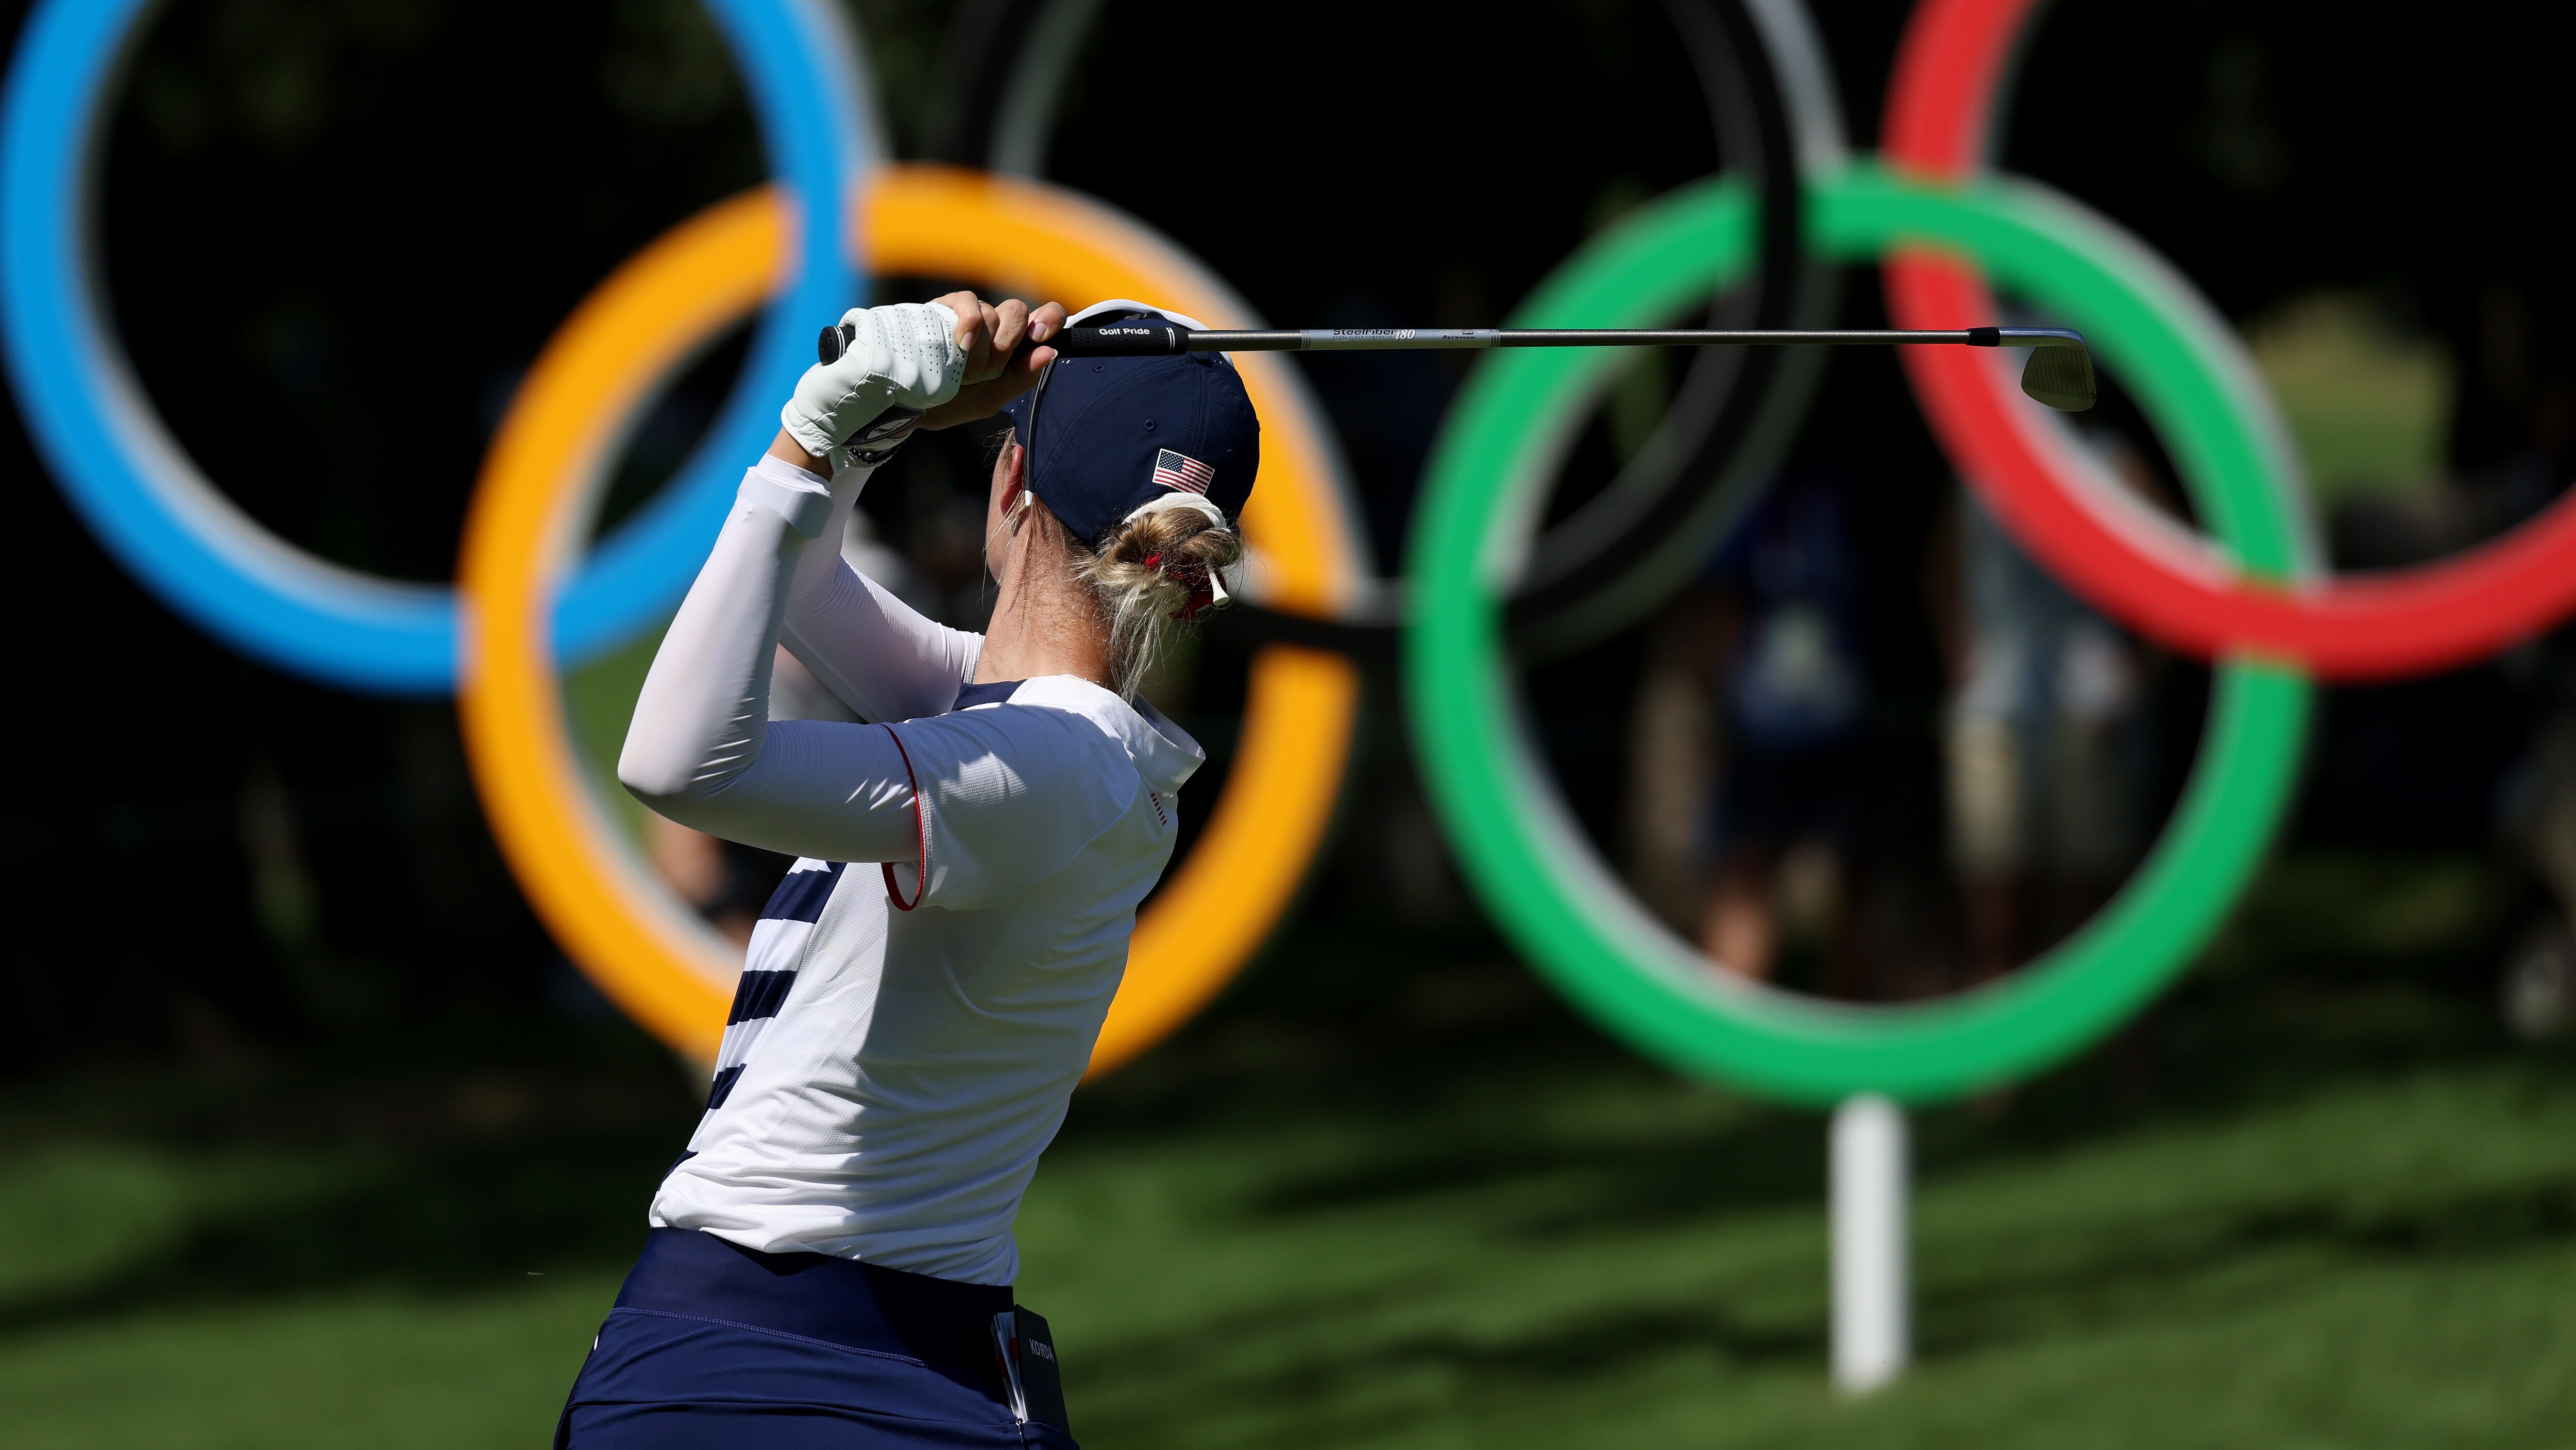 USA's Nelly Korda continues to dominate in hot third round of Olympic golf